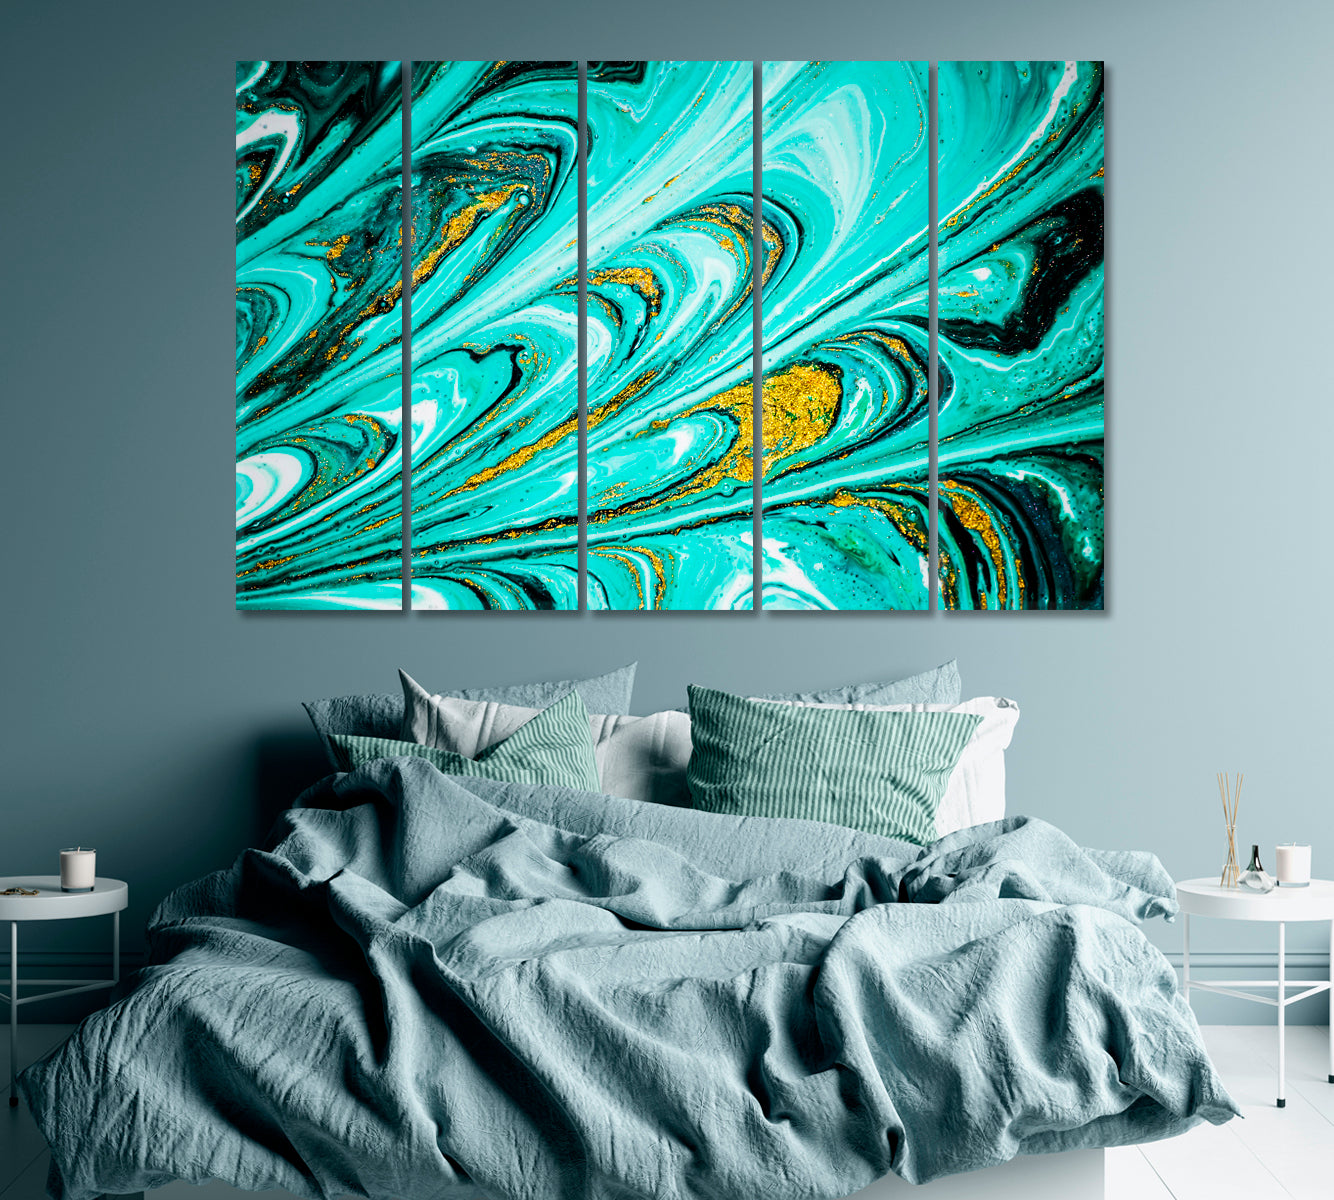 Abstract Marble Wavy Pattern Canvas Print ArtLexy 5 Panels 36"x24" inches 